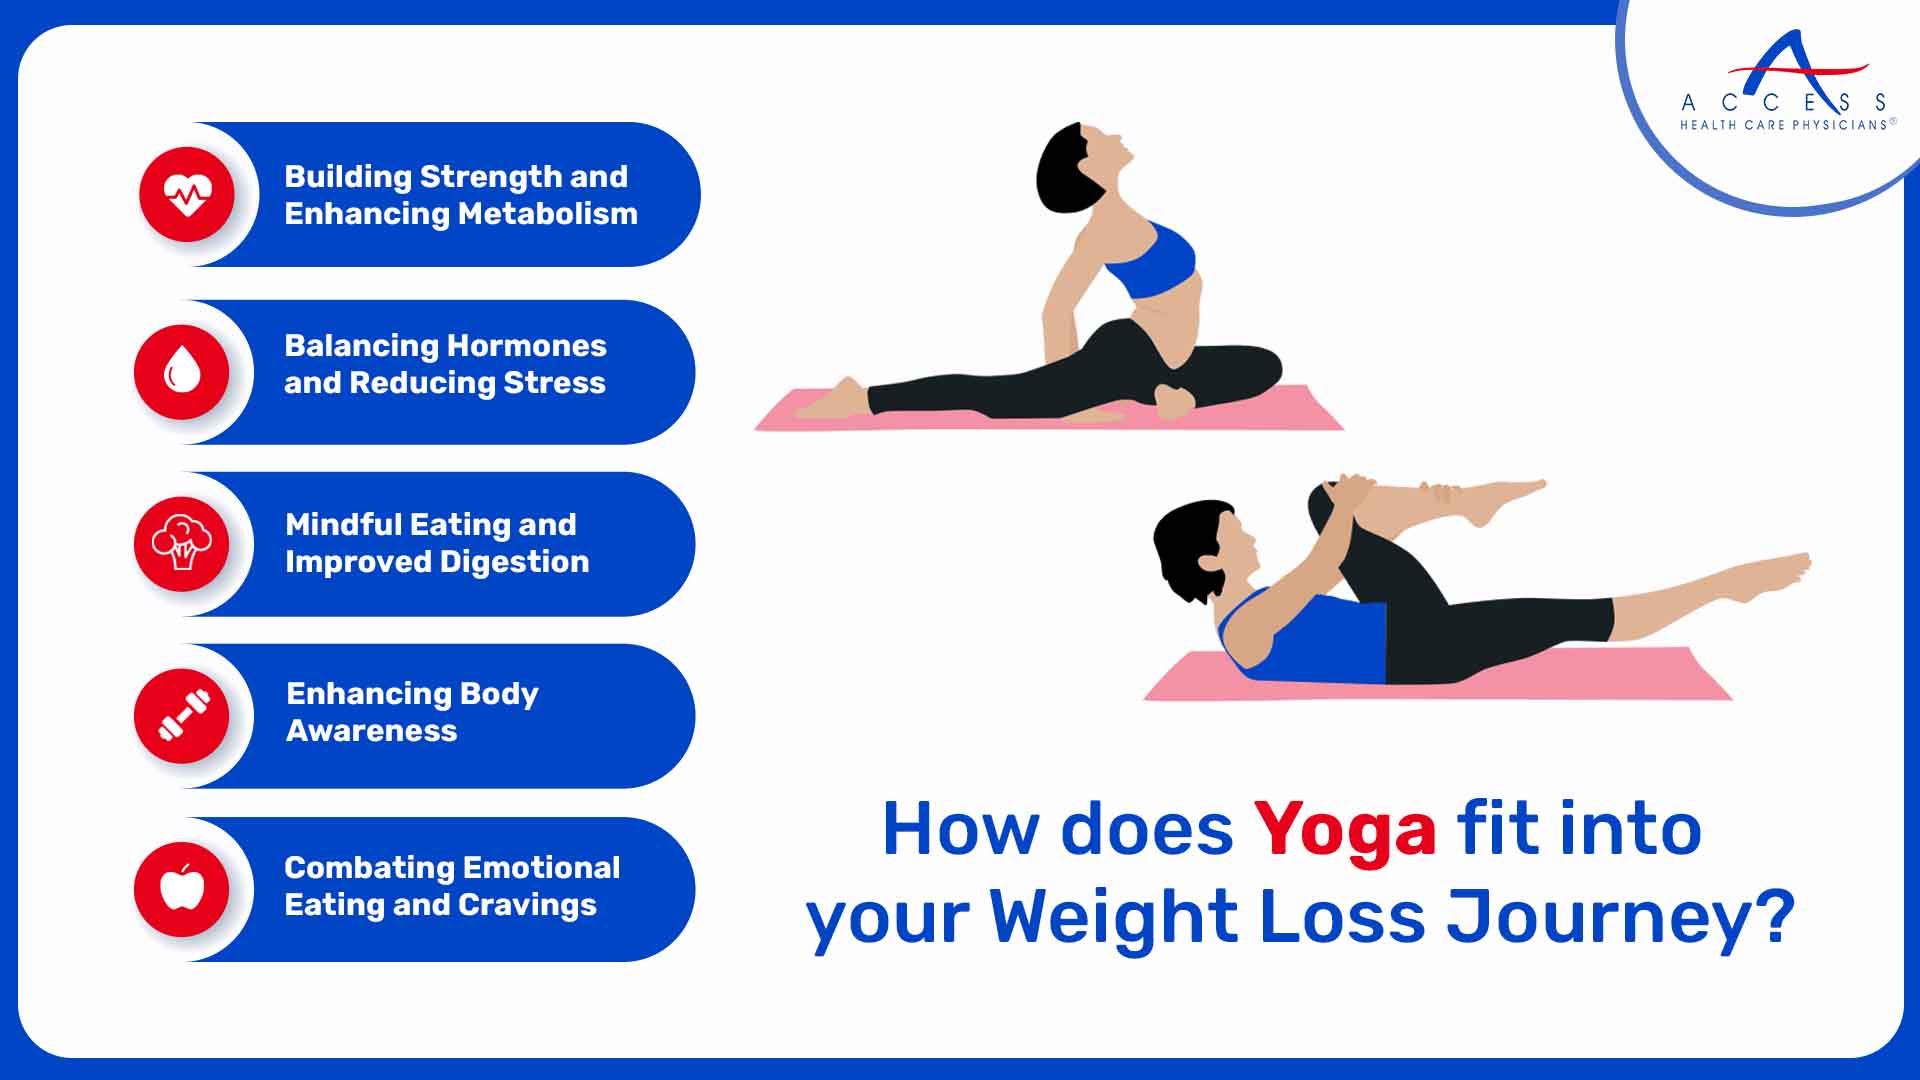 How Does Yoga Fit into Your Weight Loss Journey?